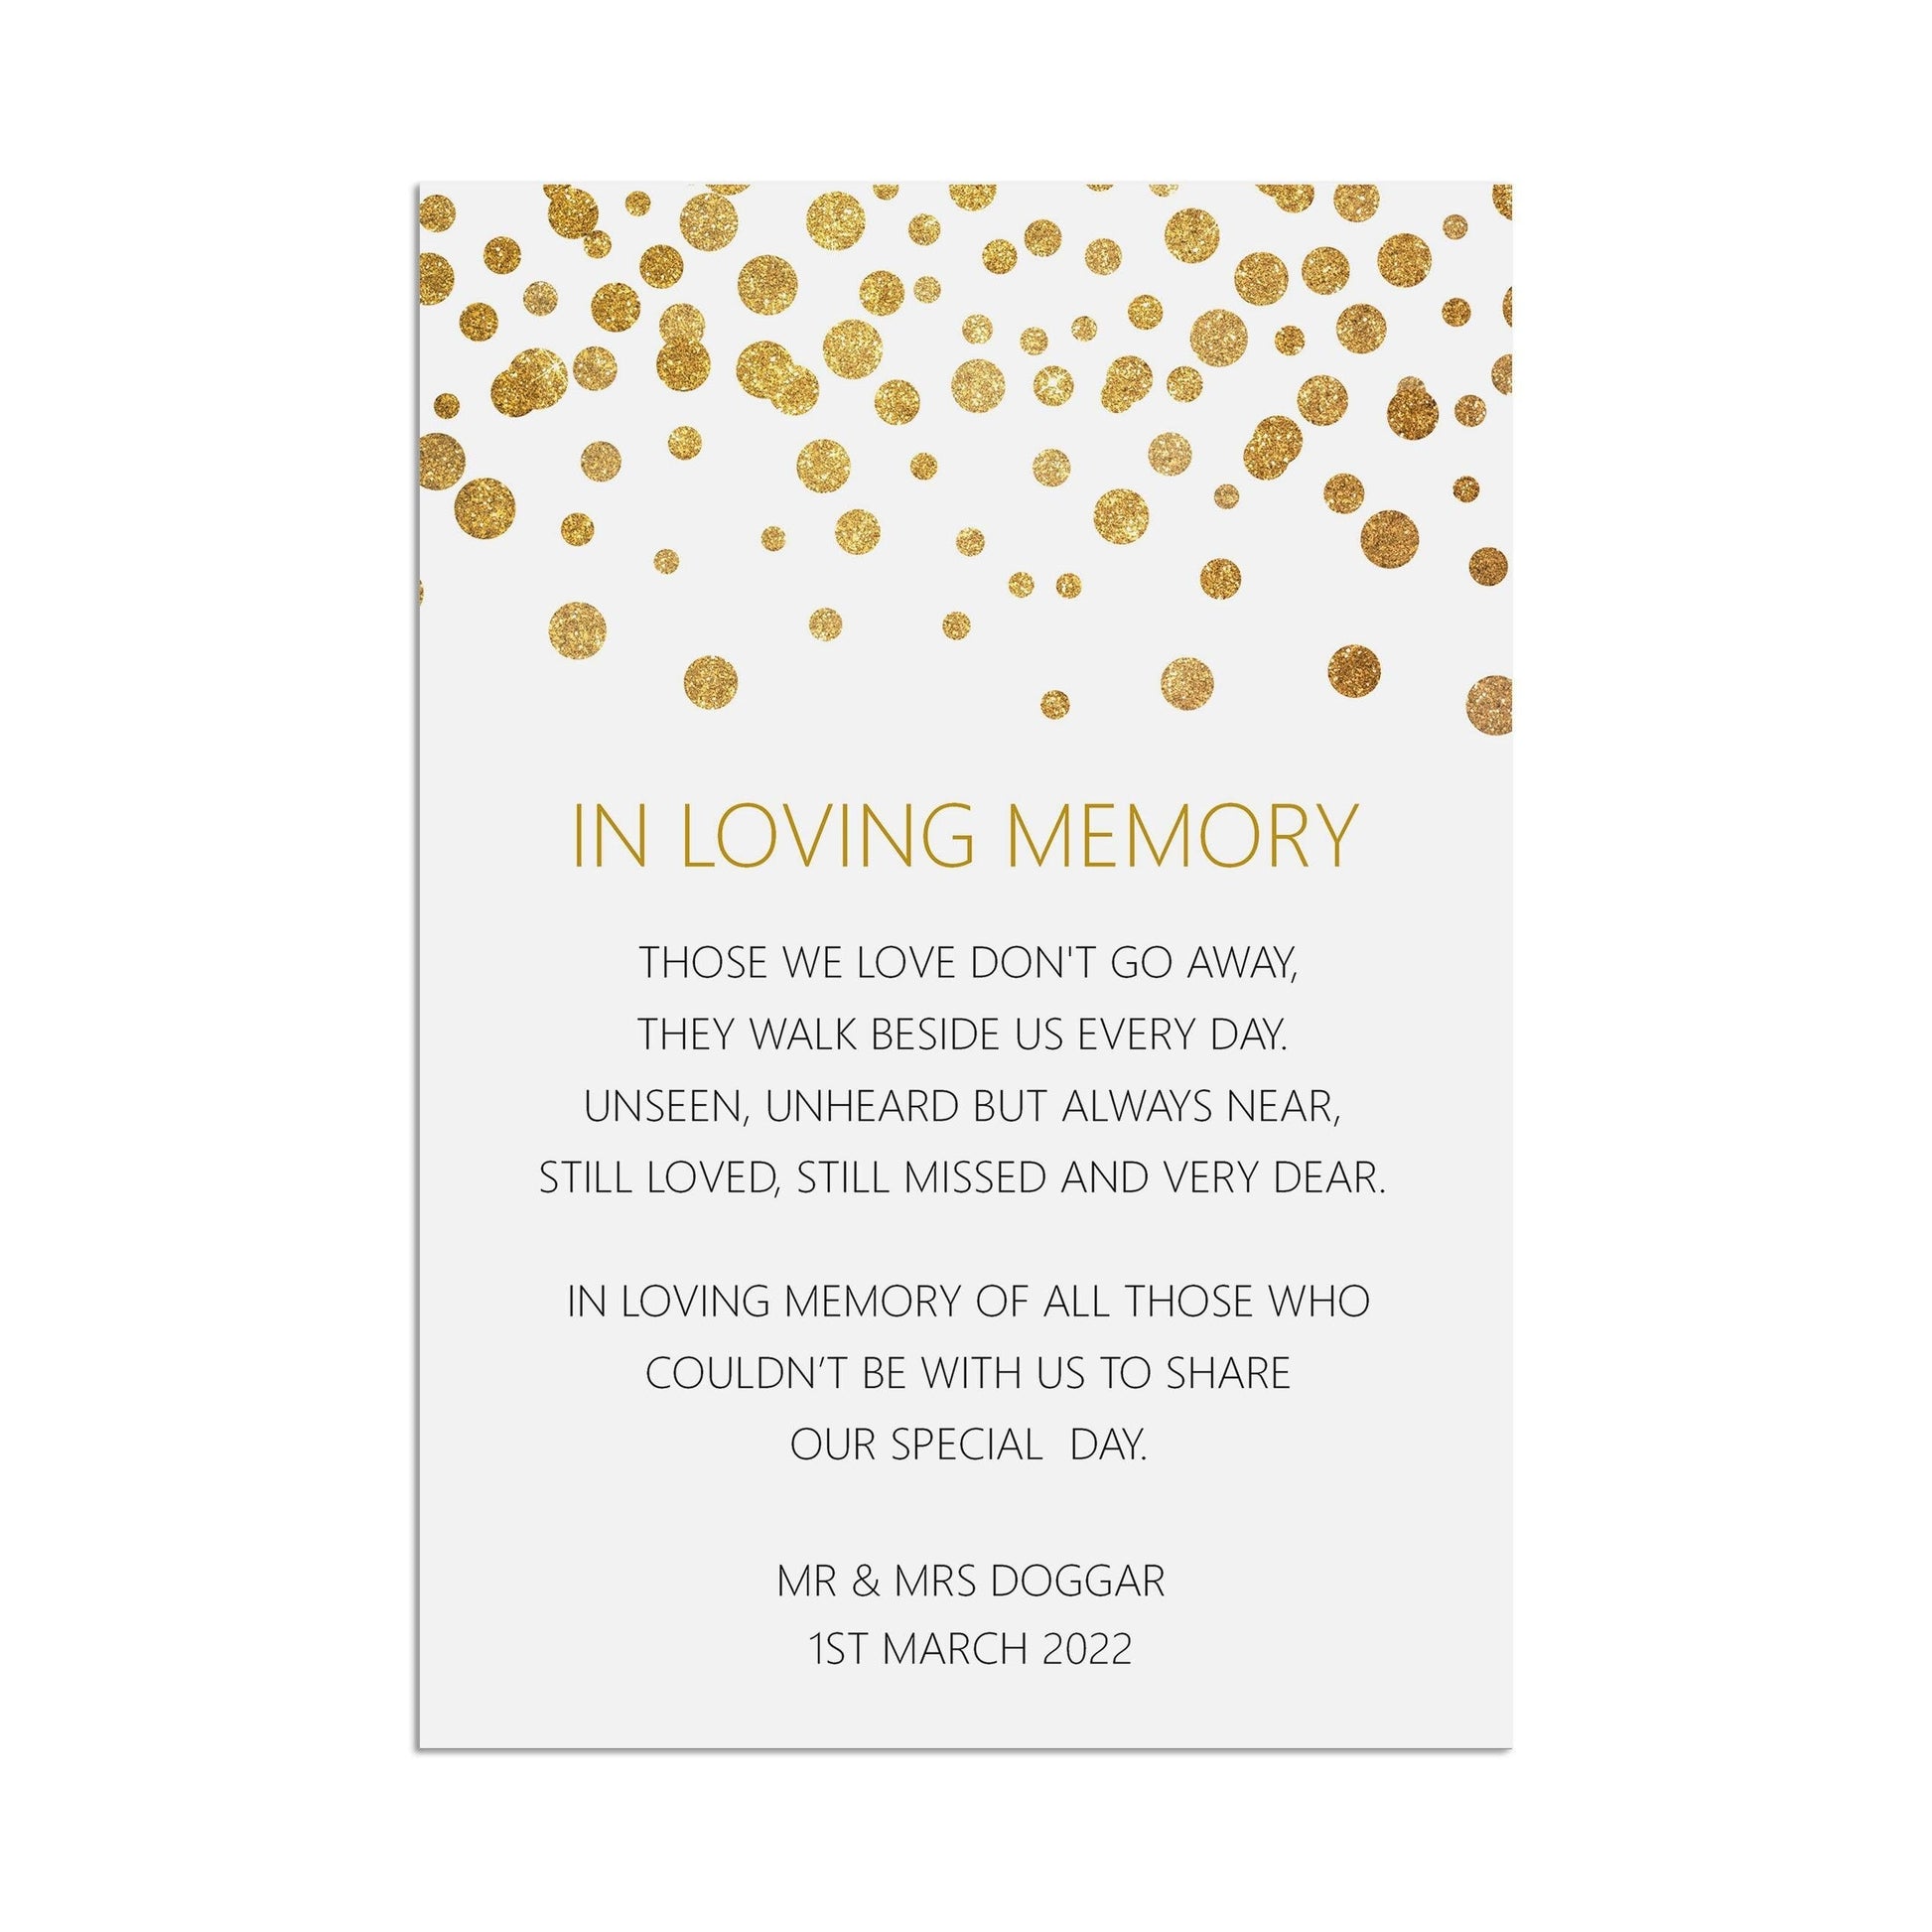  In loving memory, Remembrance Wedding Sign, Personalised Gold Effect A5, A5 Or A3 by PMPRINTED 